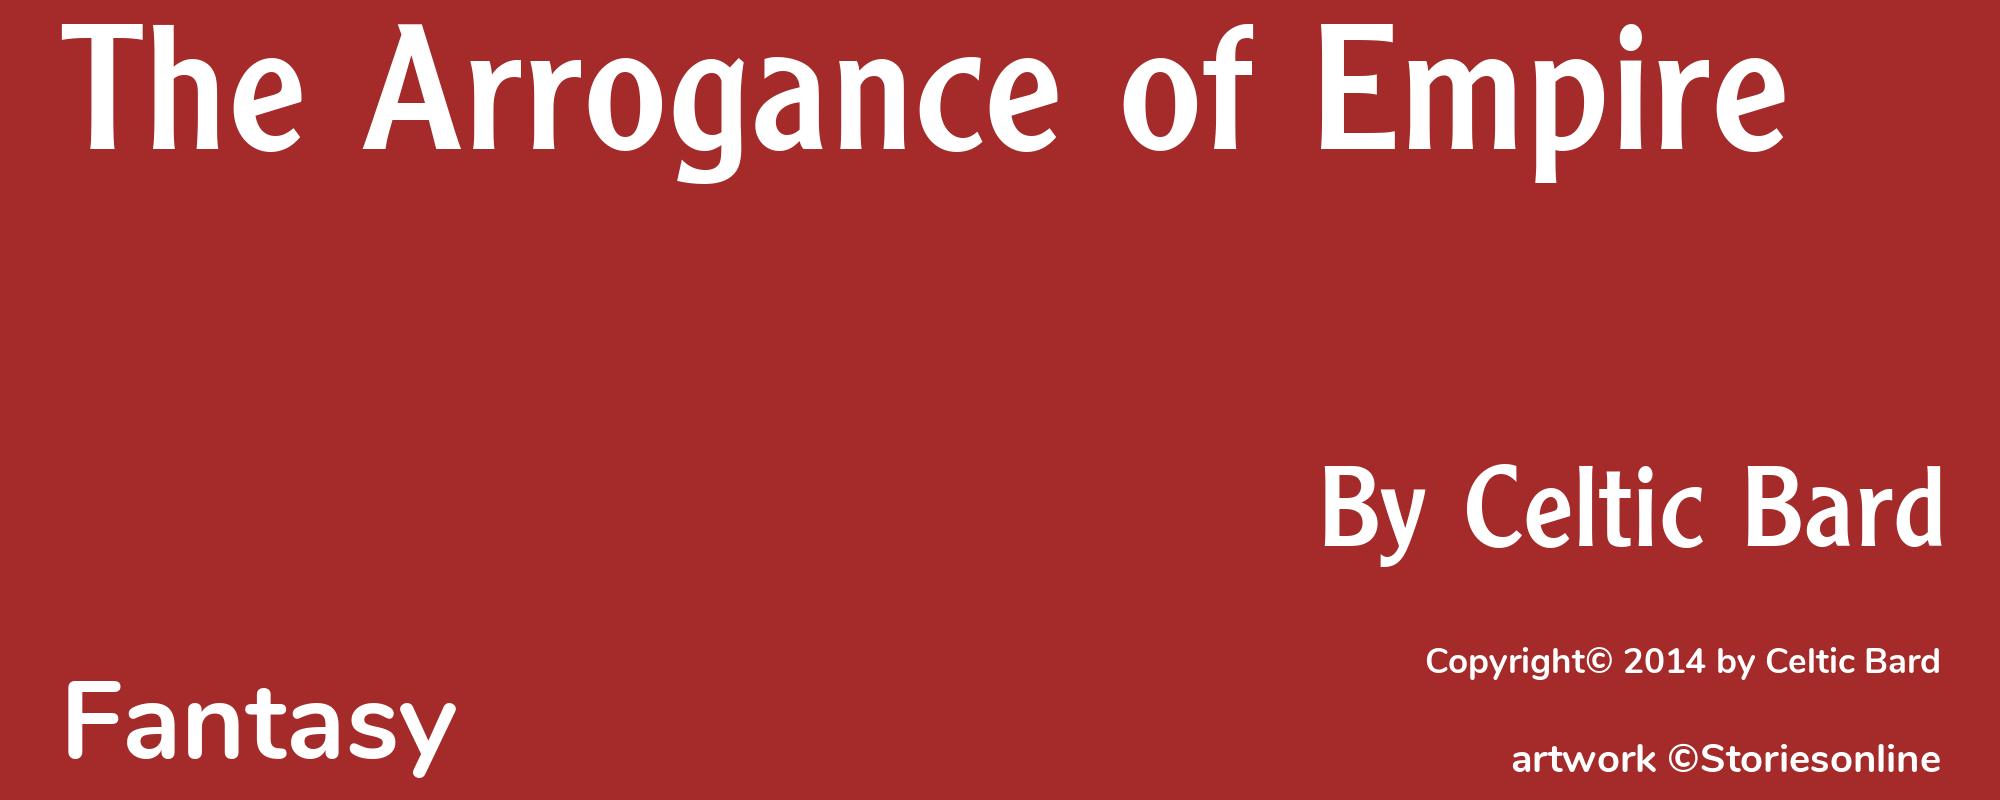 The Arrogance of Empire - Cover